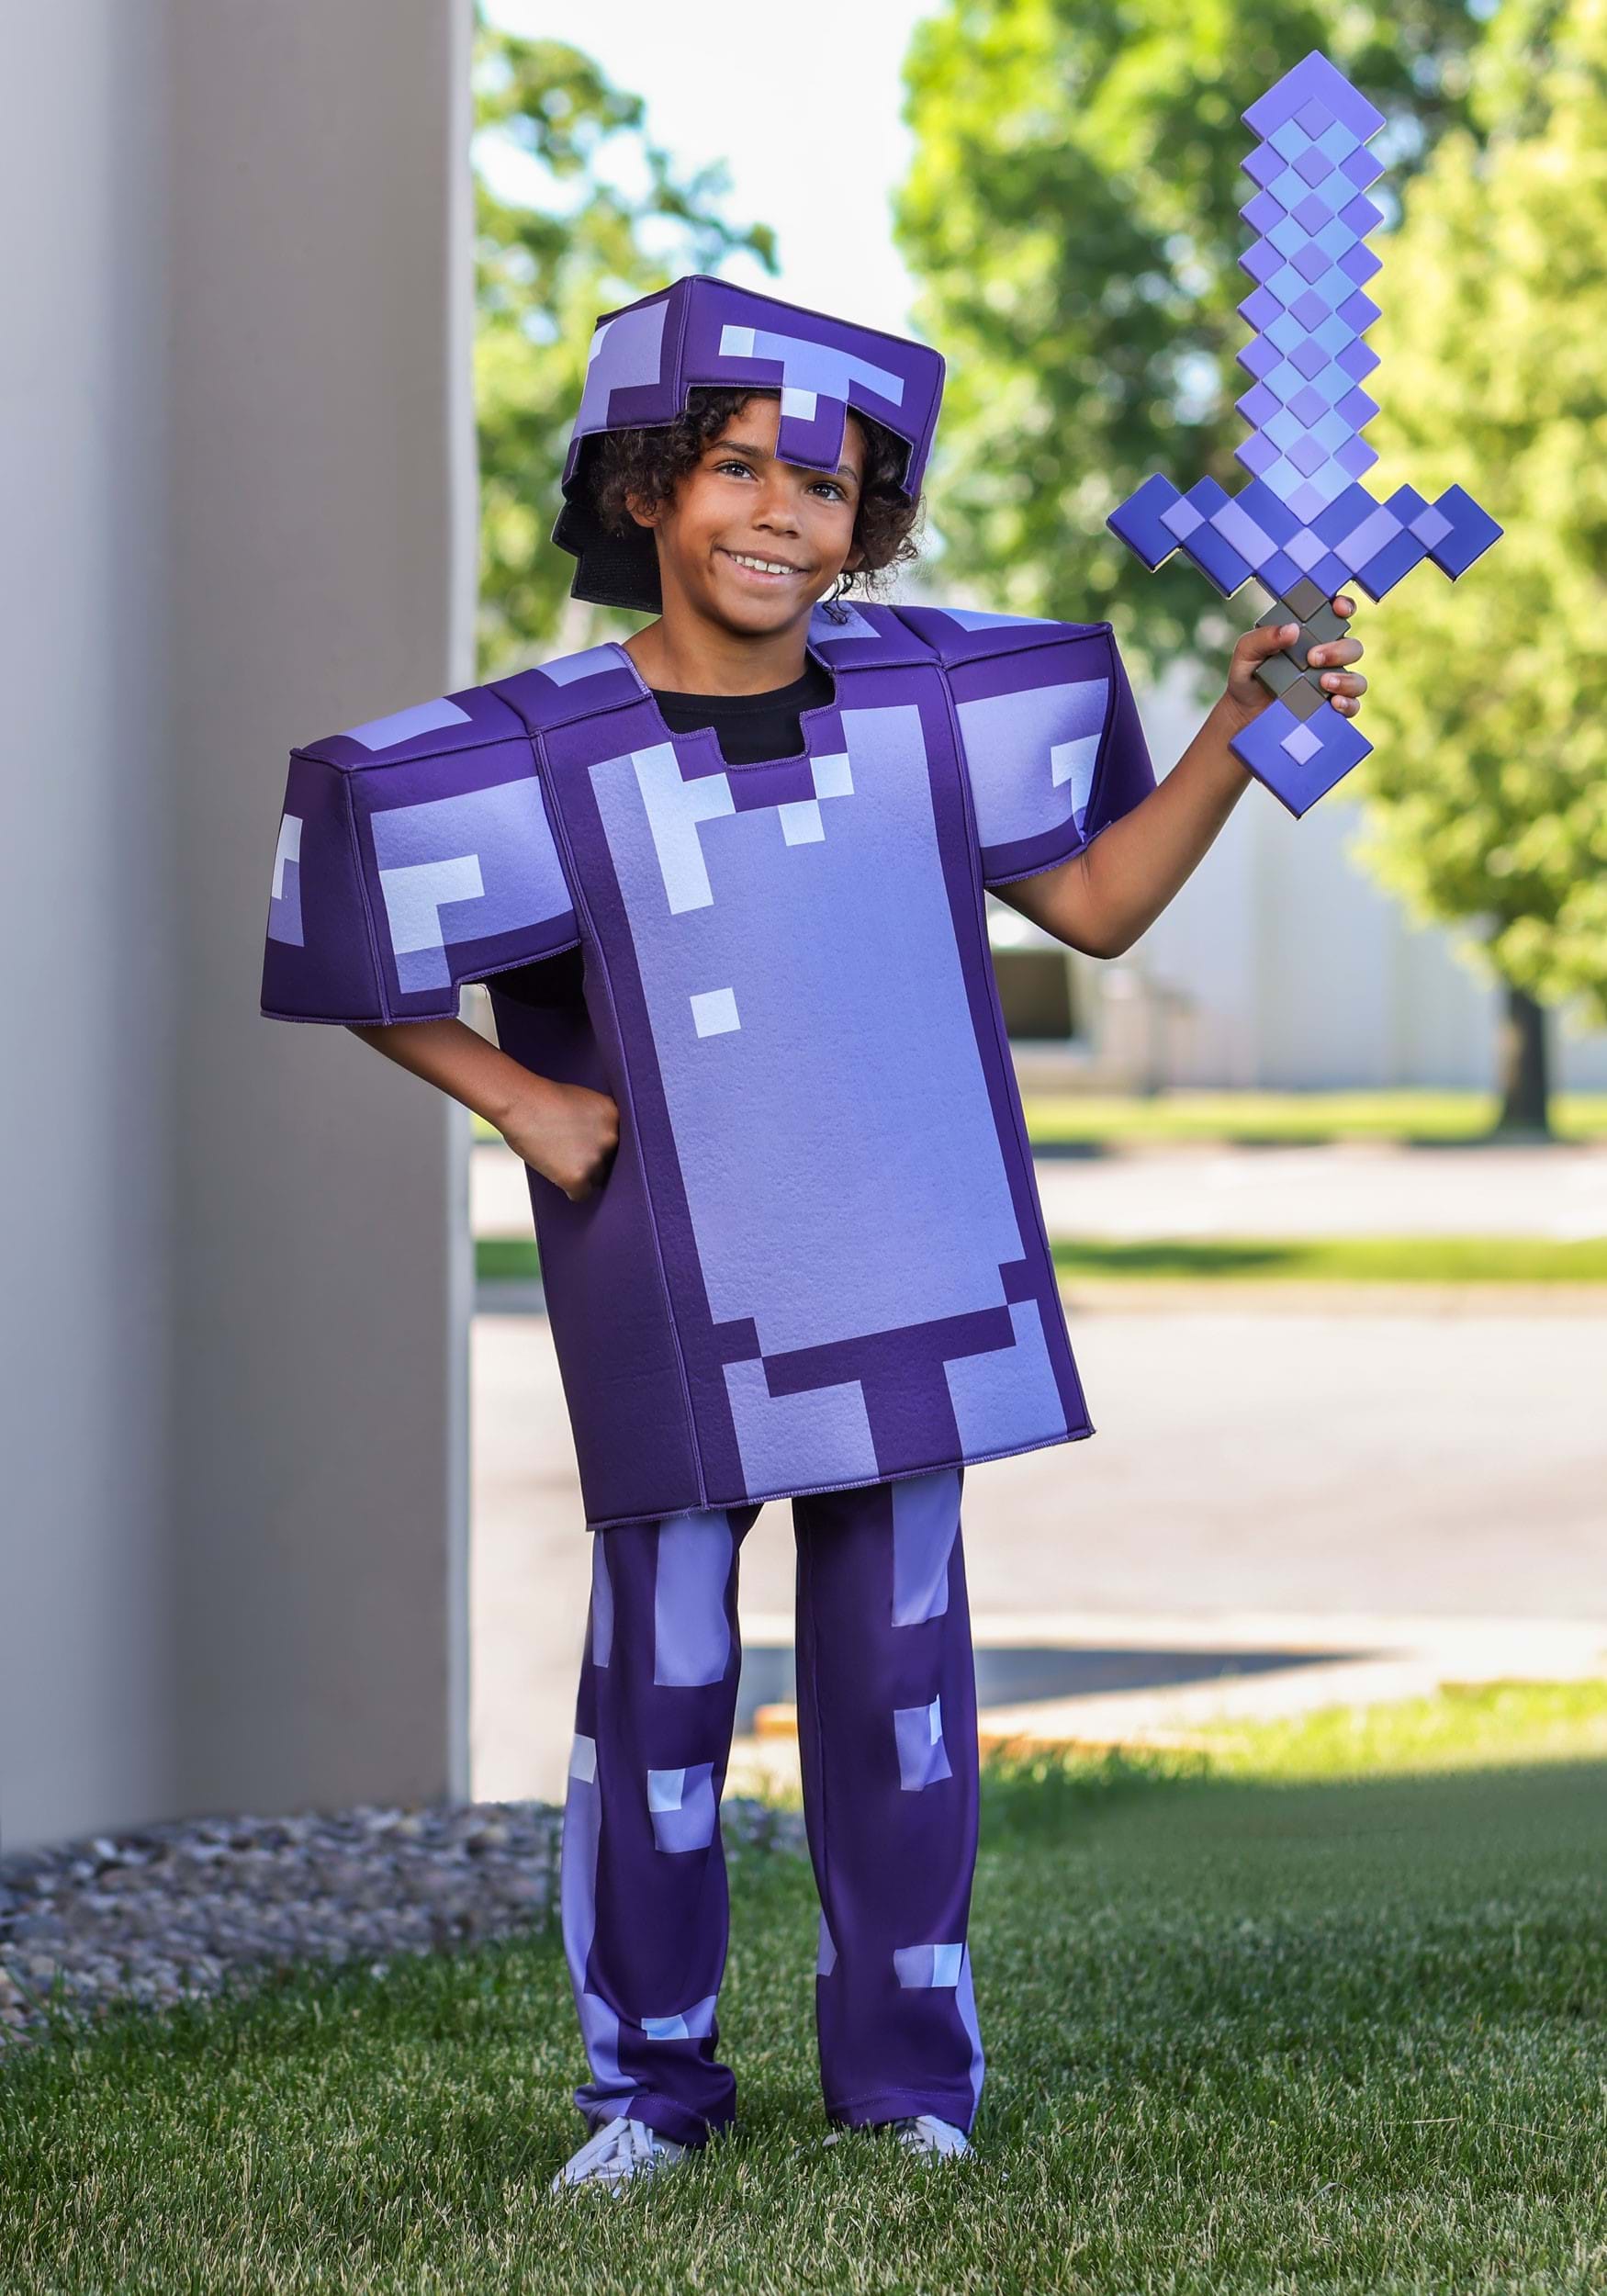 Minecraft Netherite Sword, Life-Size Role-Play Toy & Costume